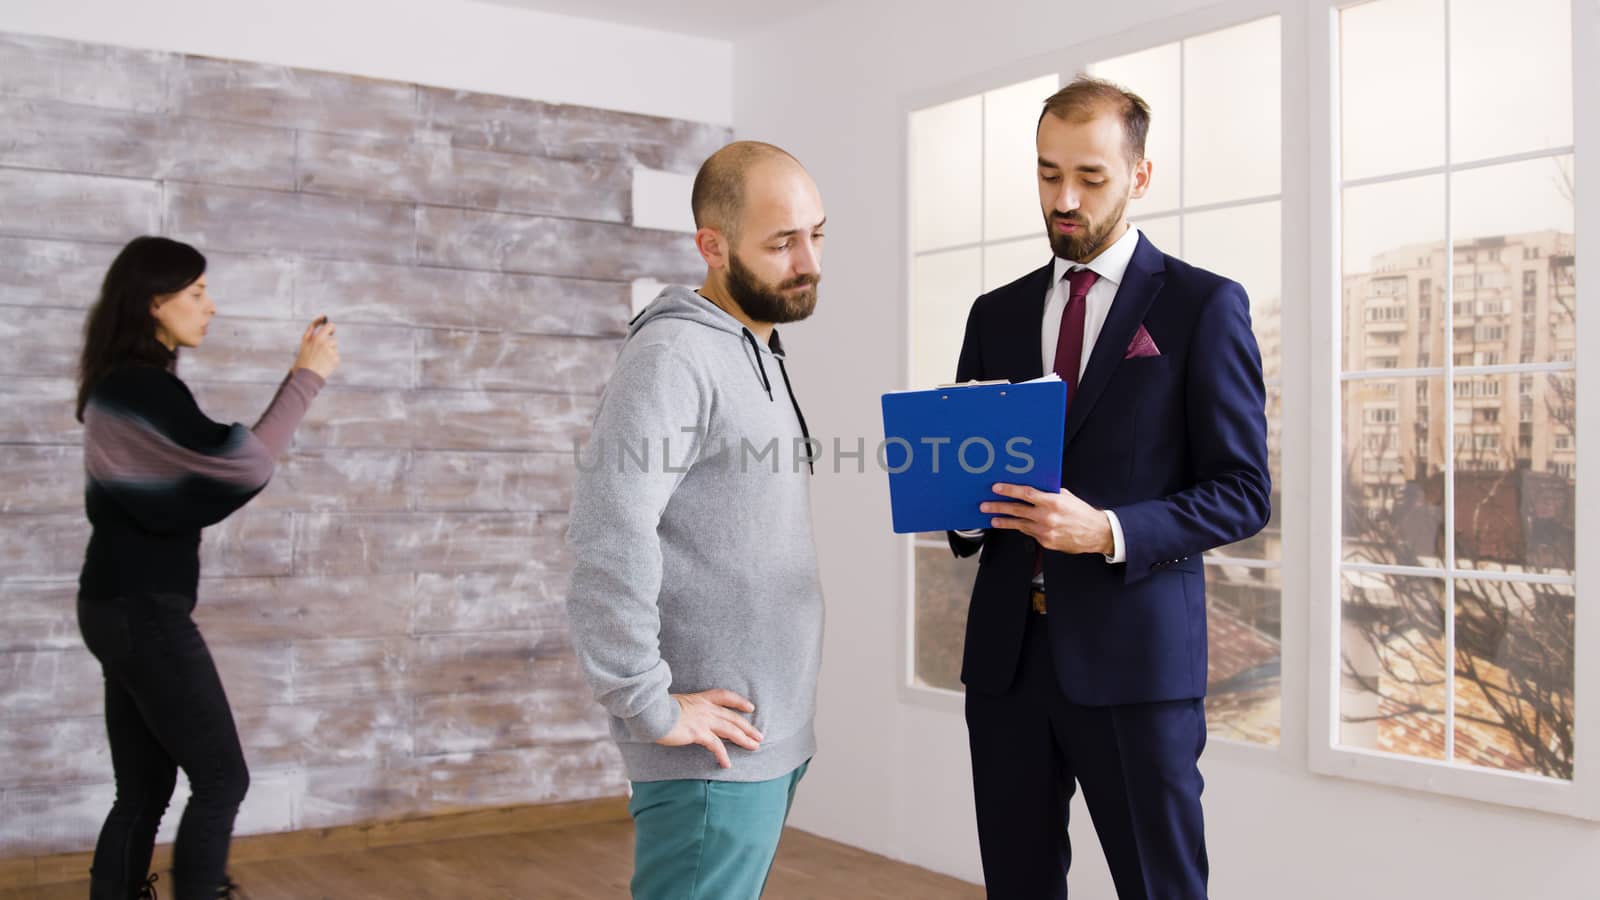 Real estate agent in business suit describes apartment to client in empty property while woman is taking photos in the background.